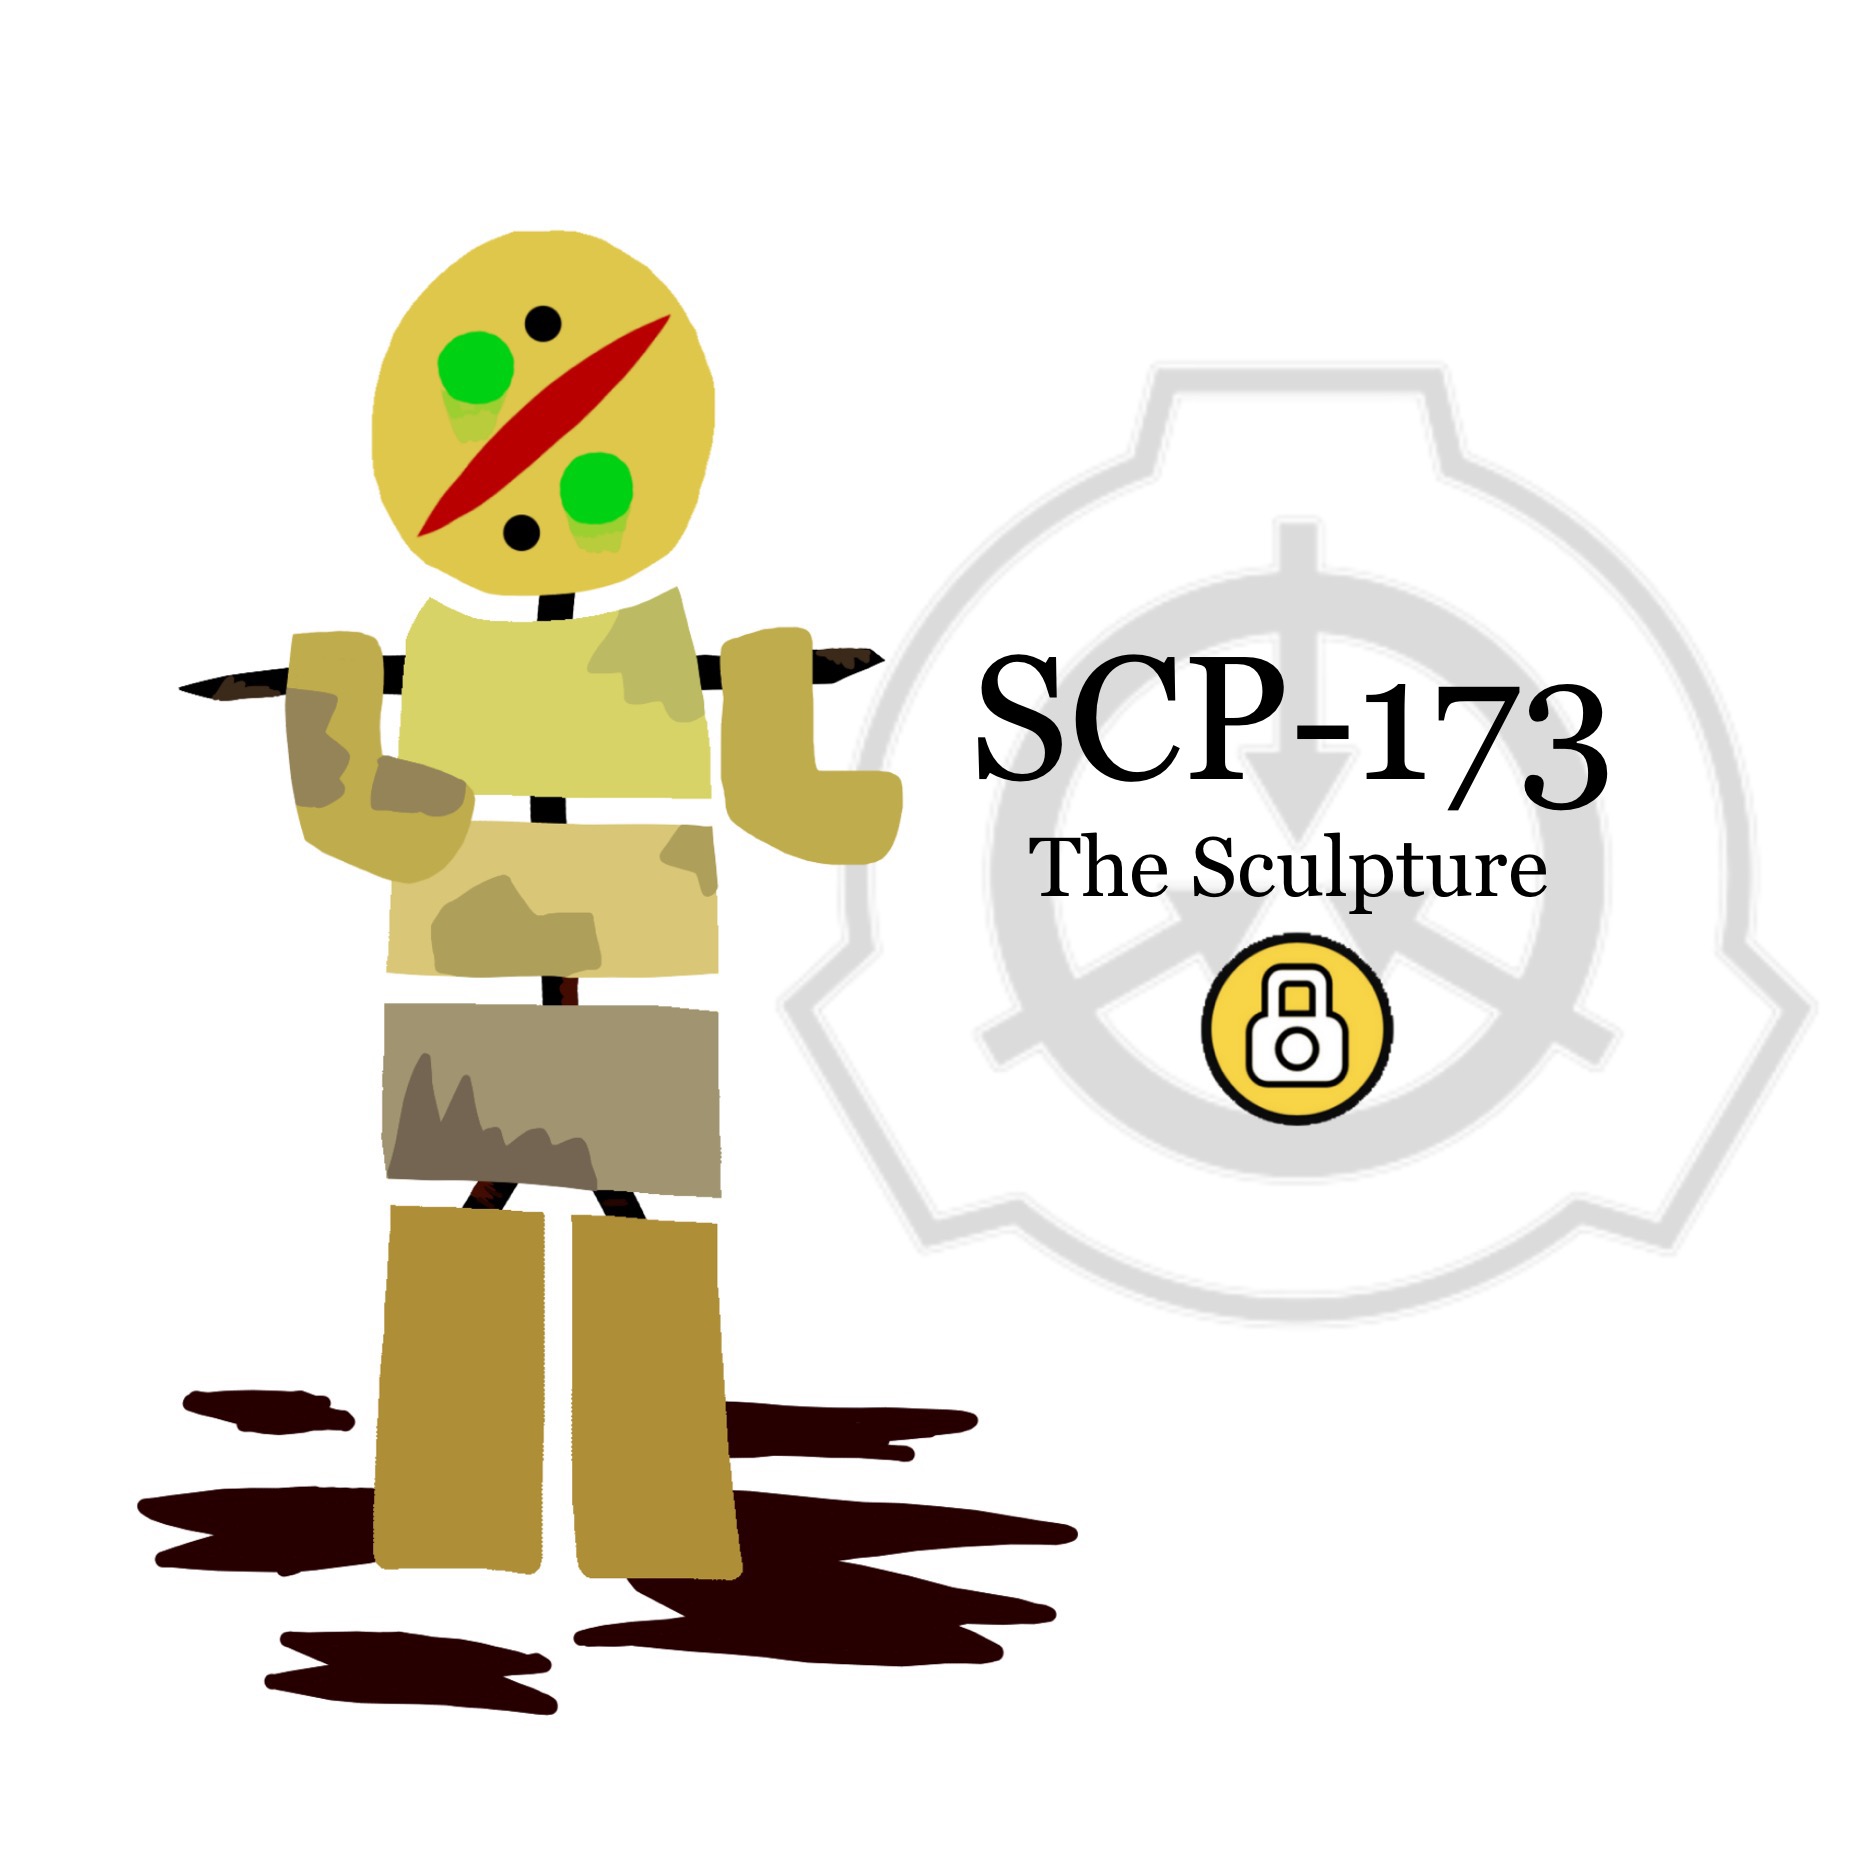 Special Containment Procedures: Item SCP-173 is to be kept in a